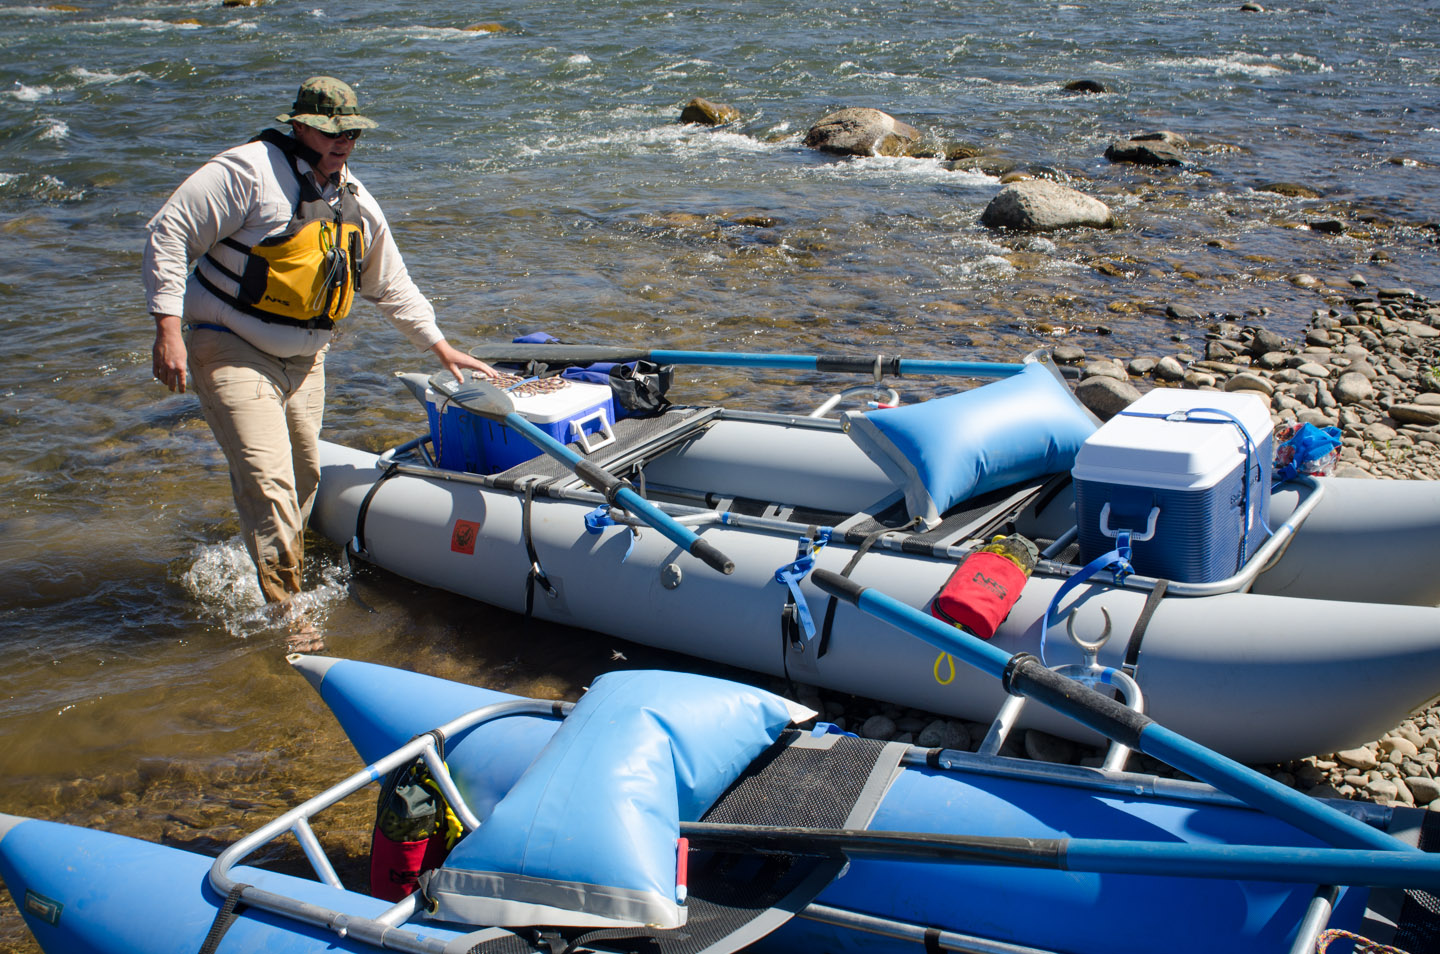 Senior Water Quality Specialist Pete Nylander makes a final inspection of the field equipment before descending the Animas river.